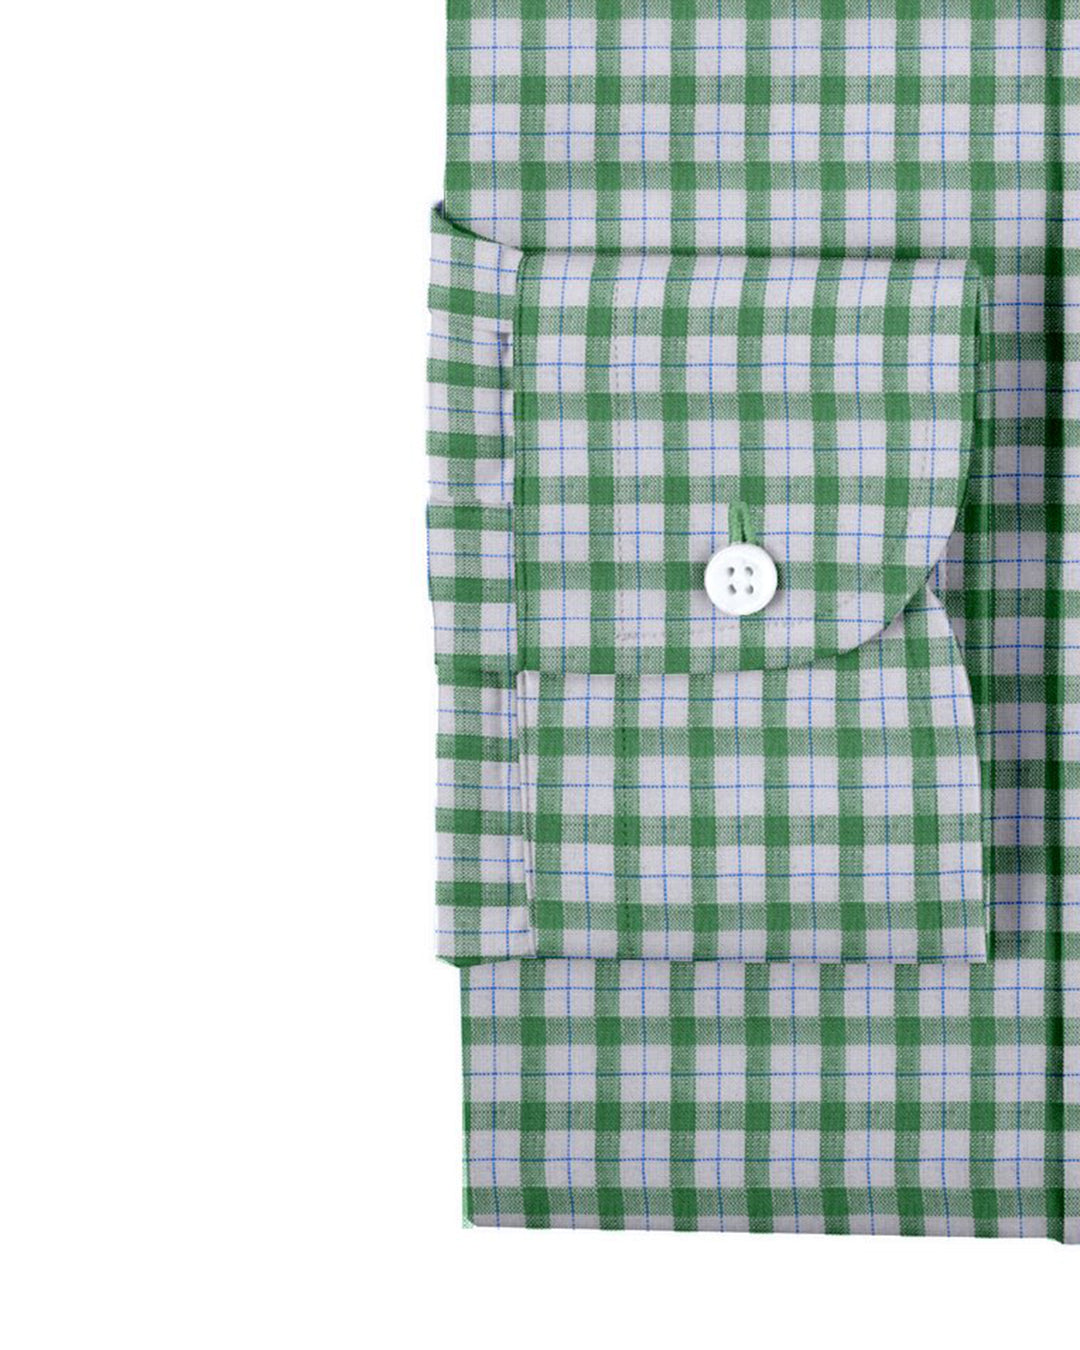 Cuff of the custom linen shirt for men in green and blue checks on white by Luxire Clothing